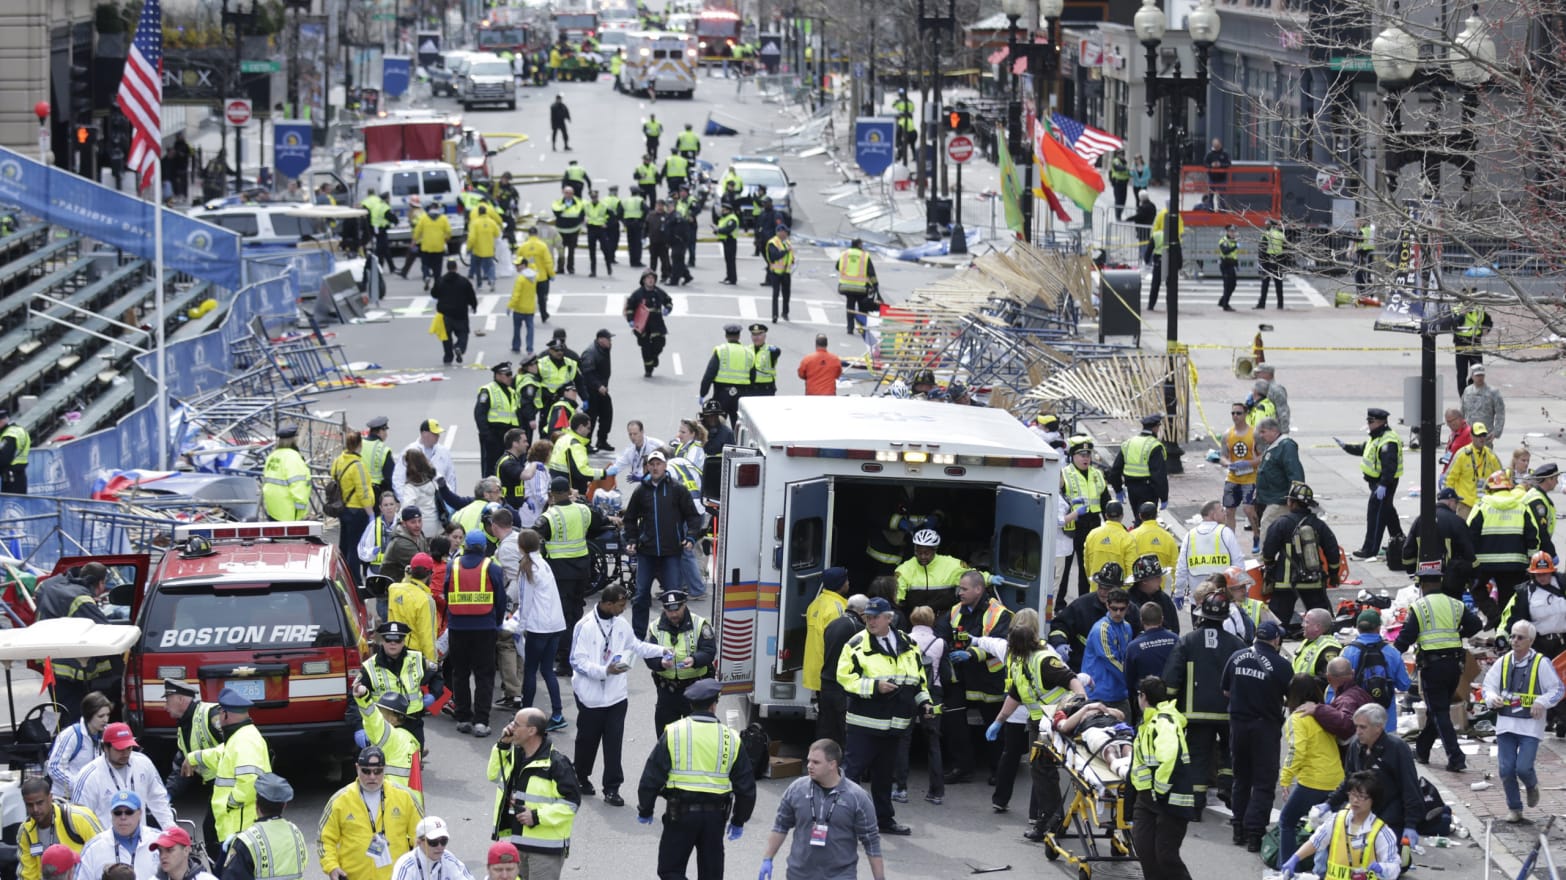 Can Reddit Solve the Boston Bombing? Probably Not. image